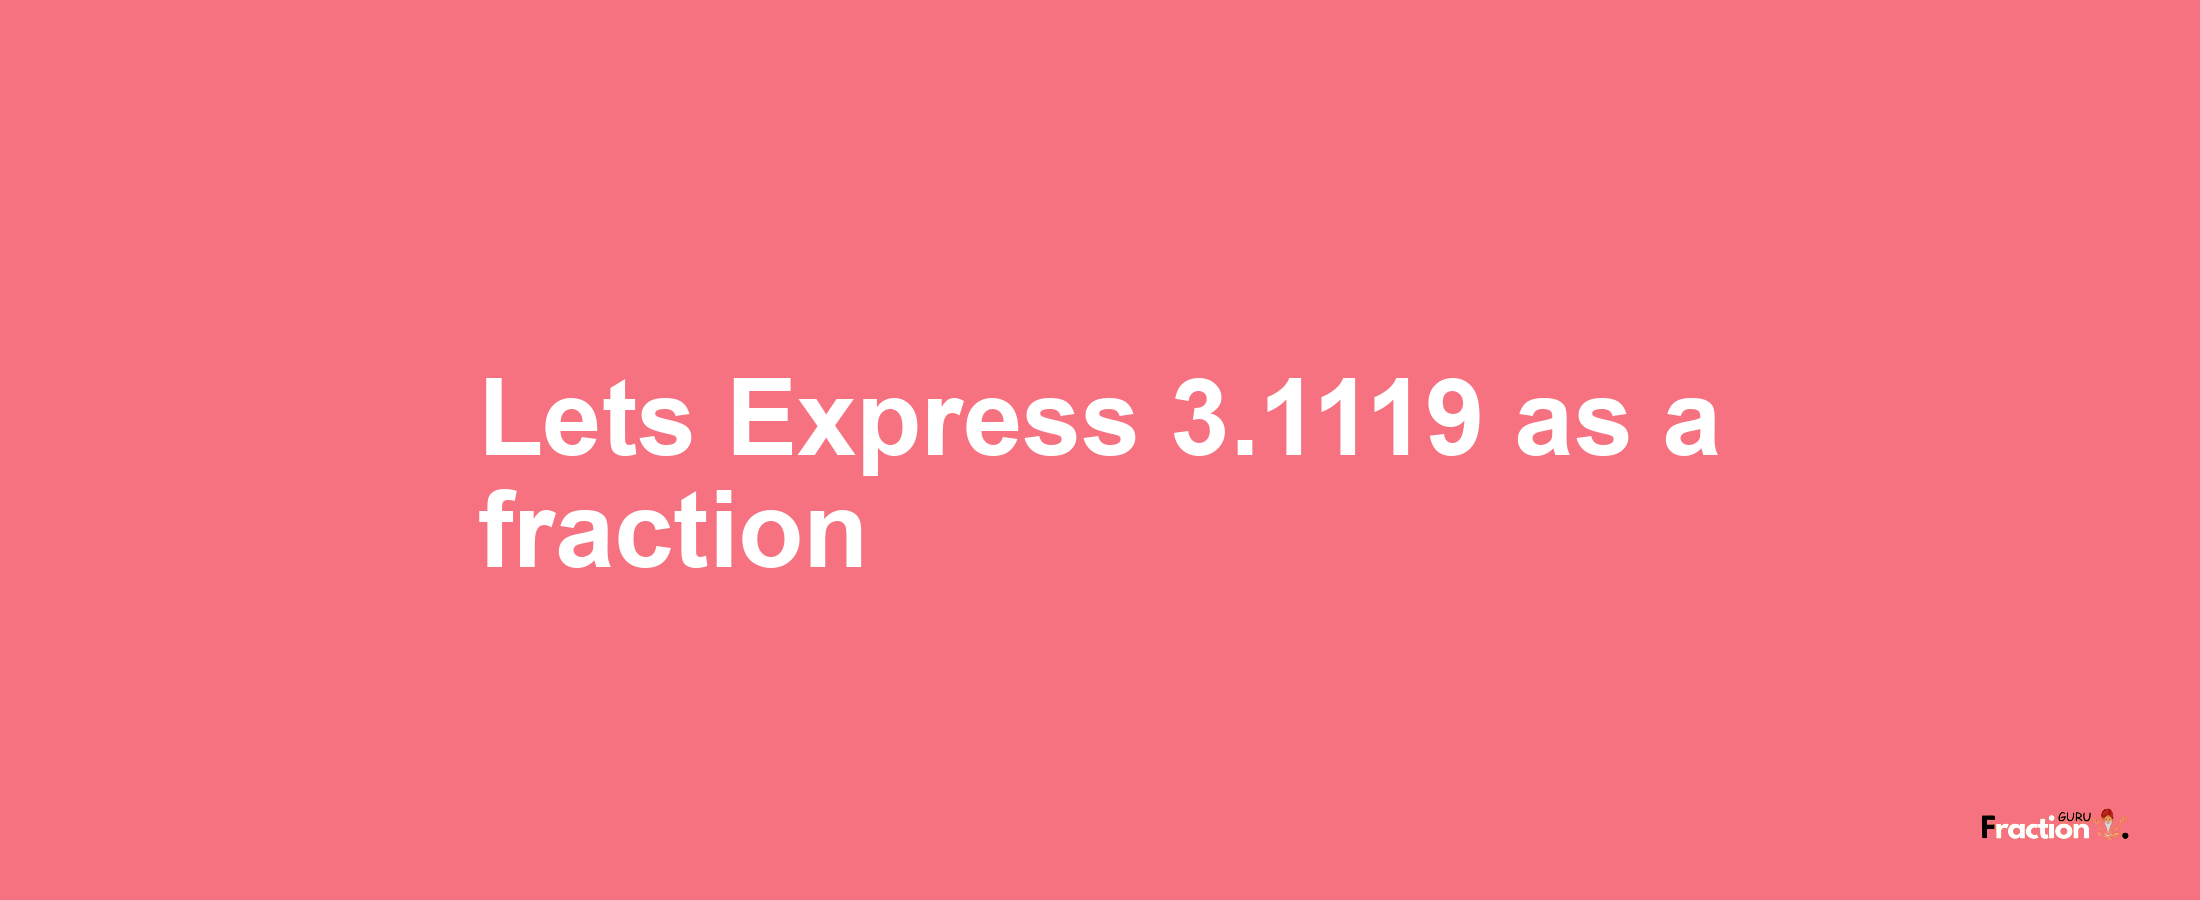 Lets Express 3.1119 as afraction